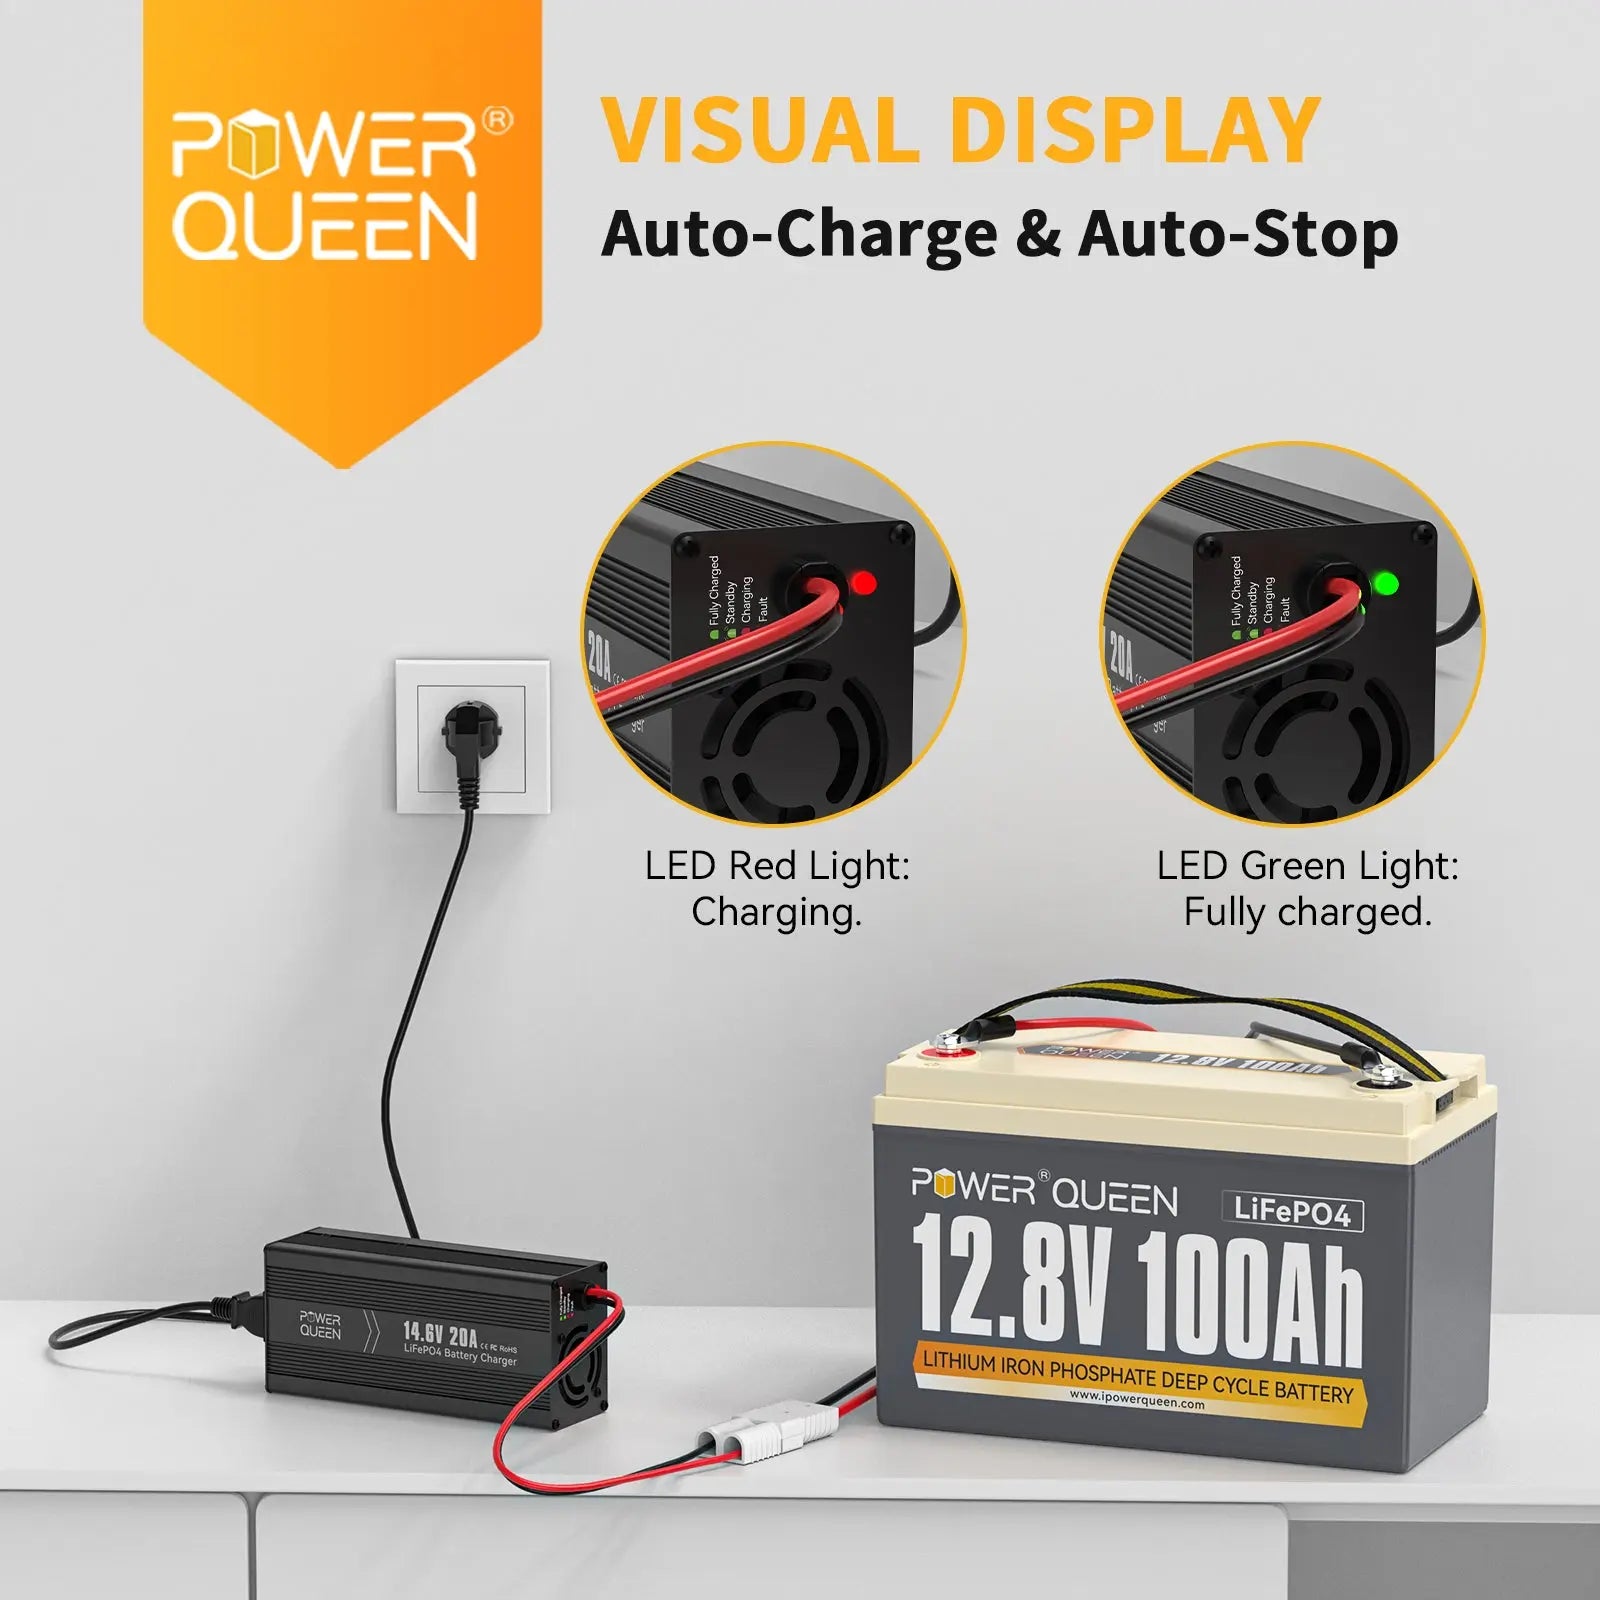 Power Queen 14.6V 20A LiFePO4 Battery Charger For 12V LiFePO4 Lithium Battery Power Queen